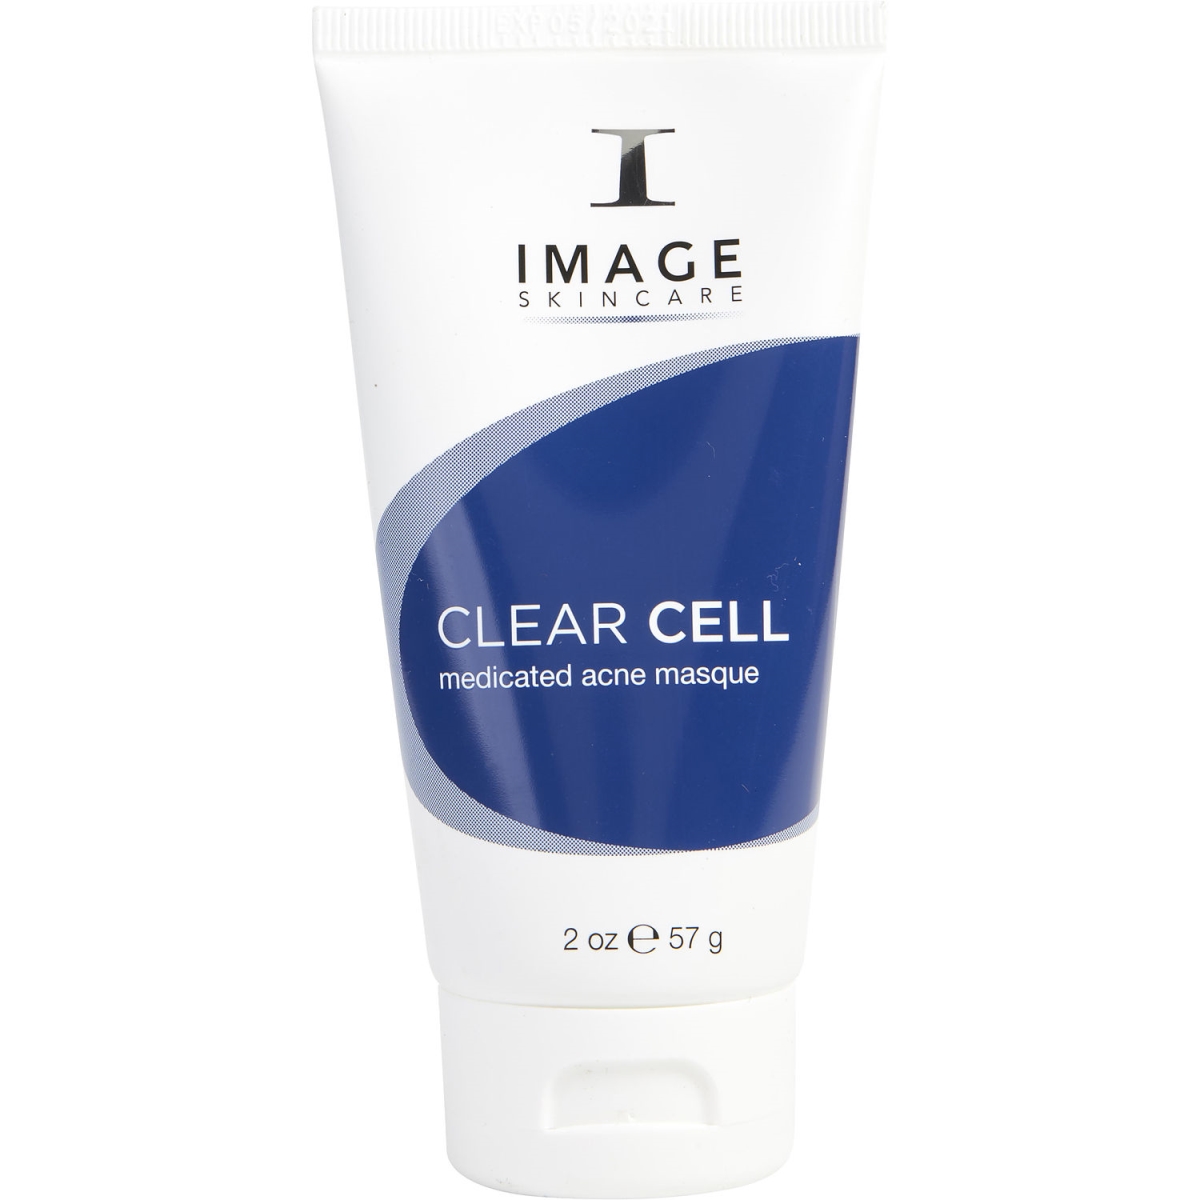 338368 2 Oz Unisex Clear Cell Medicated Acne Masque